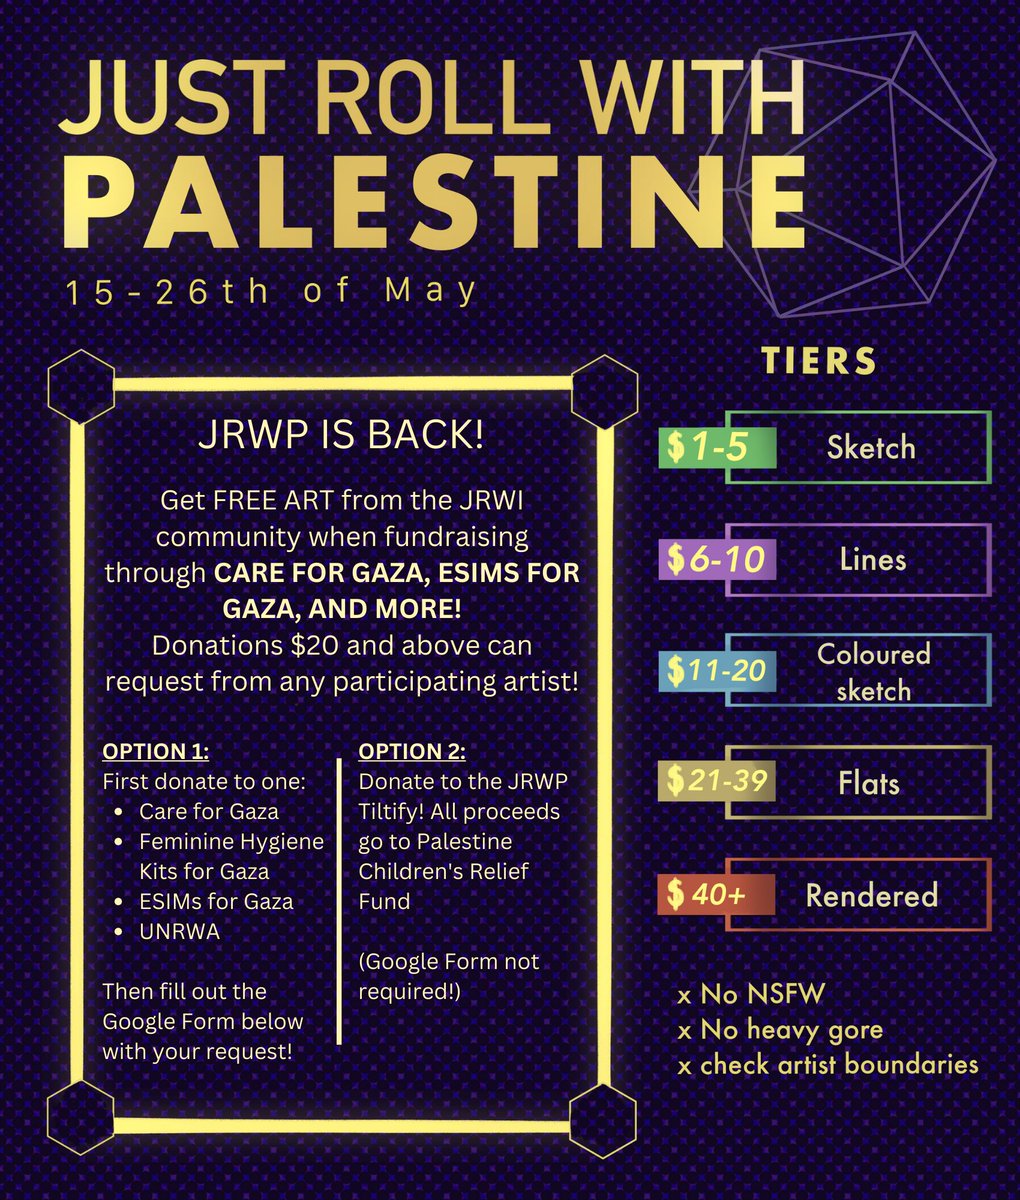 If you purchase an eSIM and show us, you can even get FREE ART from many talented artists! More info below!  

#justrollwithpalestine #connectingGaza